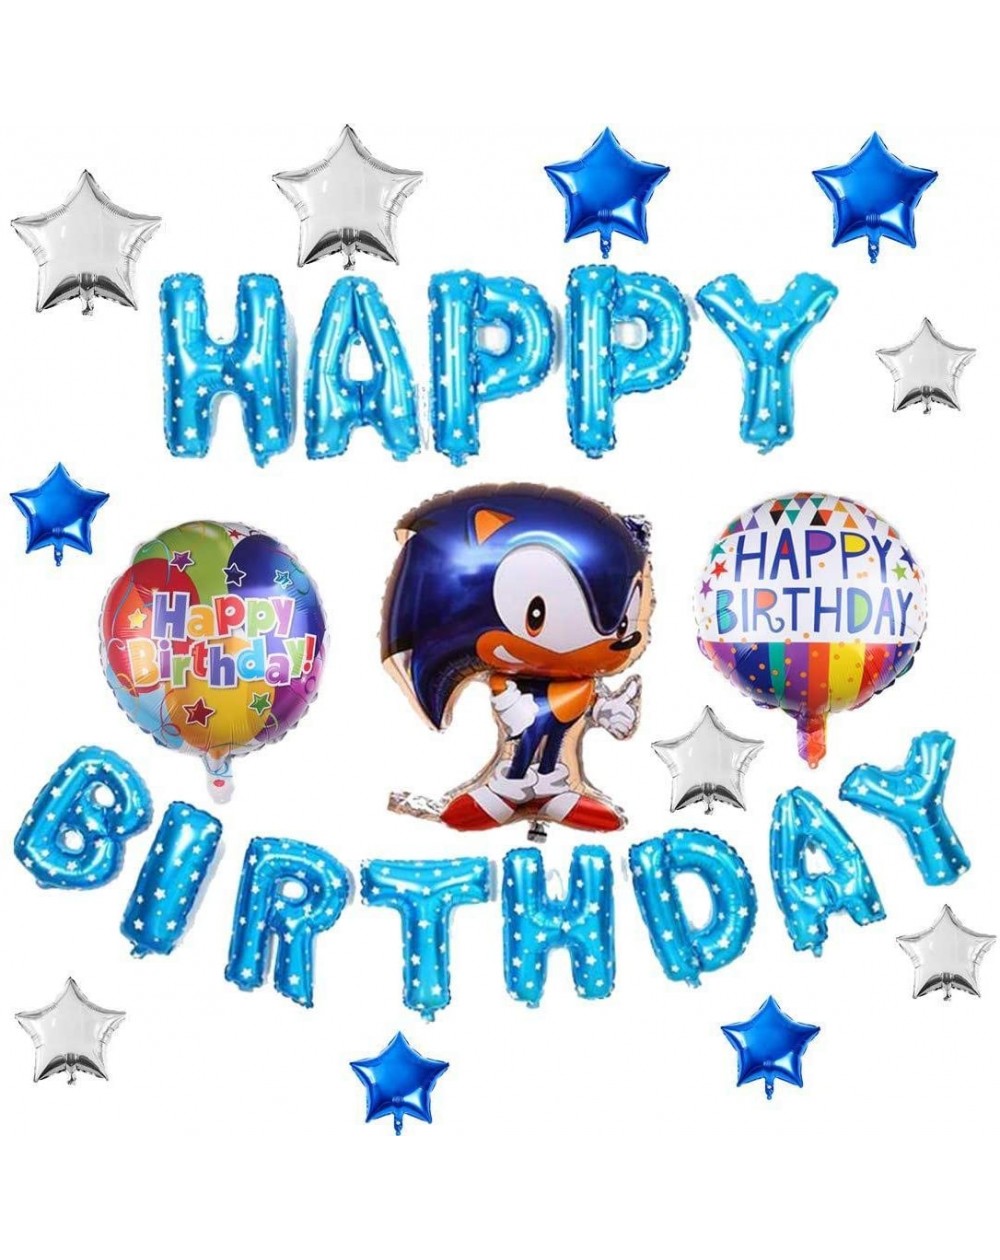 Balloons Sonic the Hedgehog Balloons Sonic Birthday Decorations For Kids-Sonic Party Supplies Sonic Happy Birthday Banner Set...